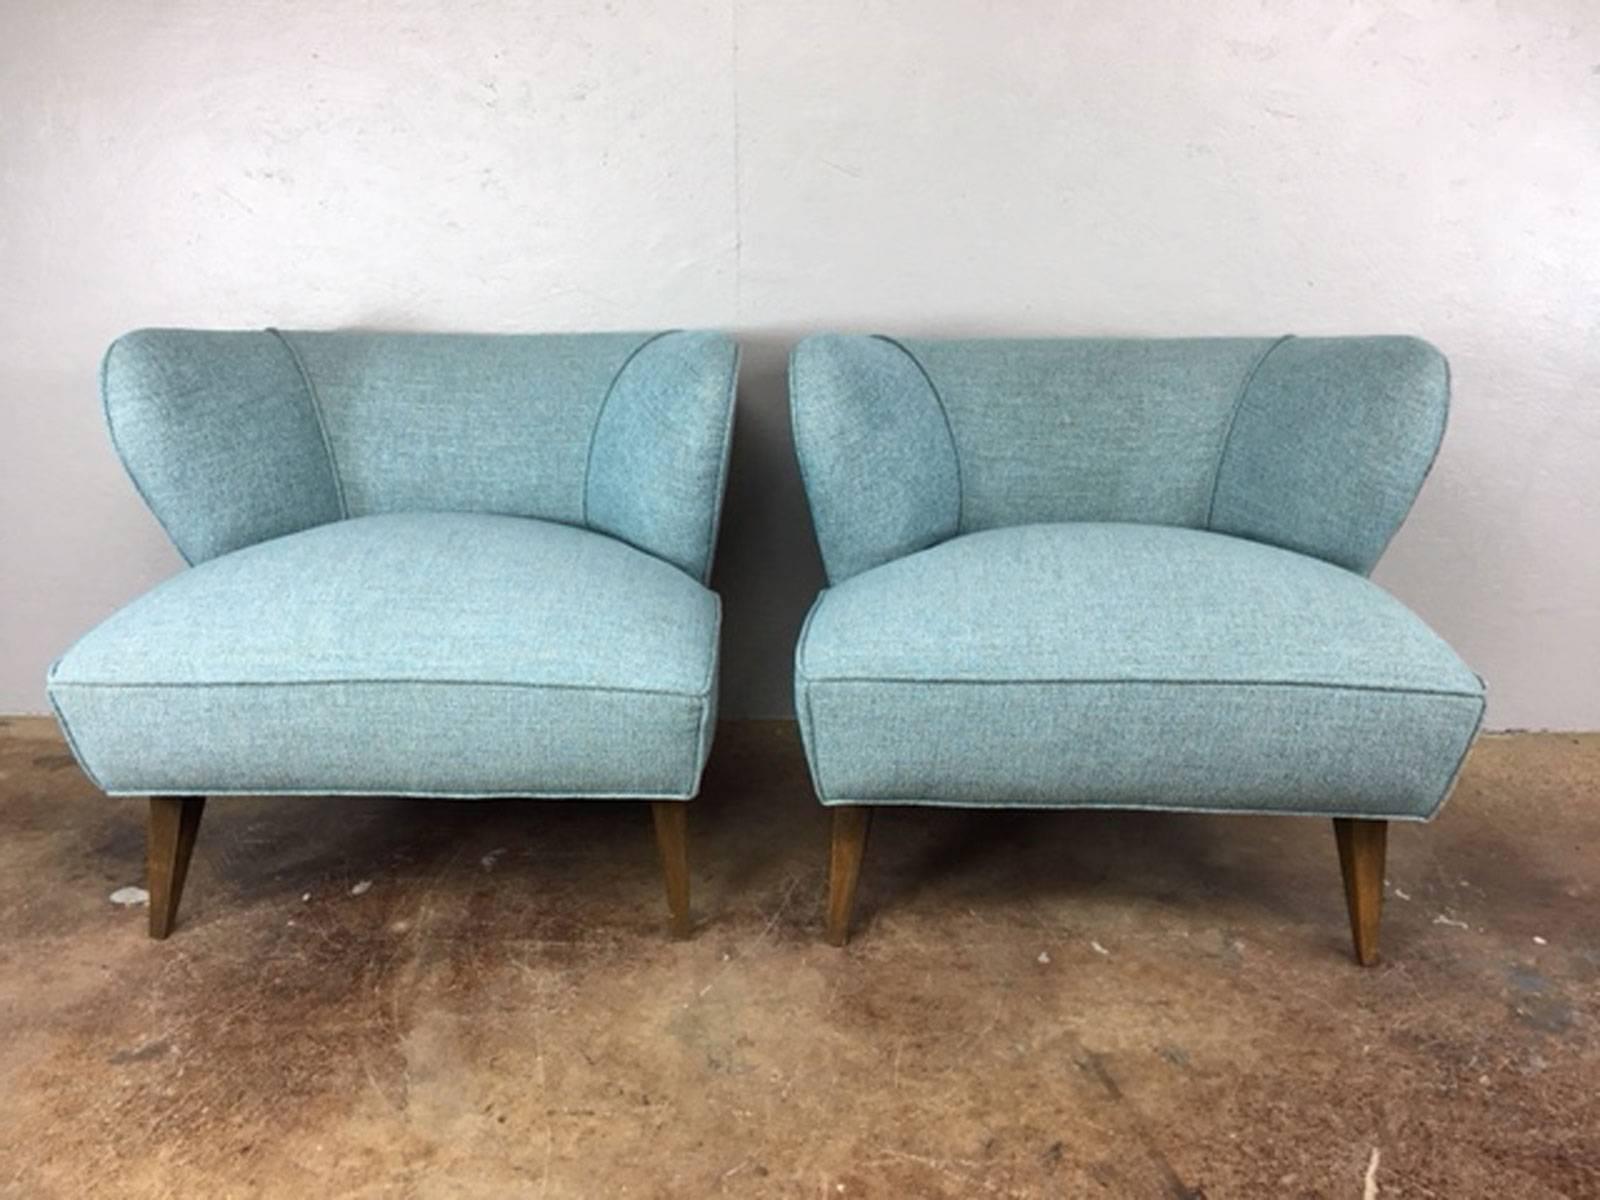 Extraordinary low profile pair of Mid-Century Modern club chairs reupholstered in one of the new modern and luxurious fabrics out of California that are 100% polyester for easy cleaning and long wear. Soft and attractive, the new polyesters are